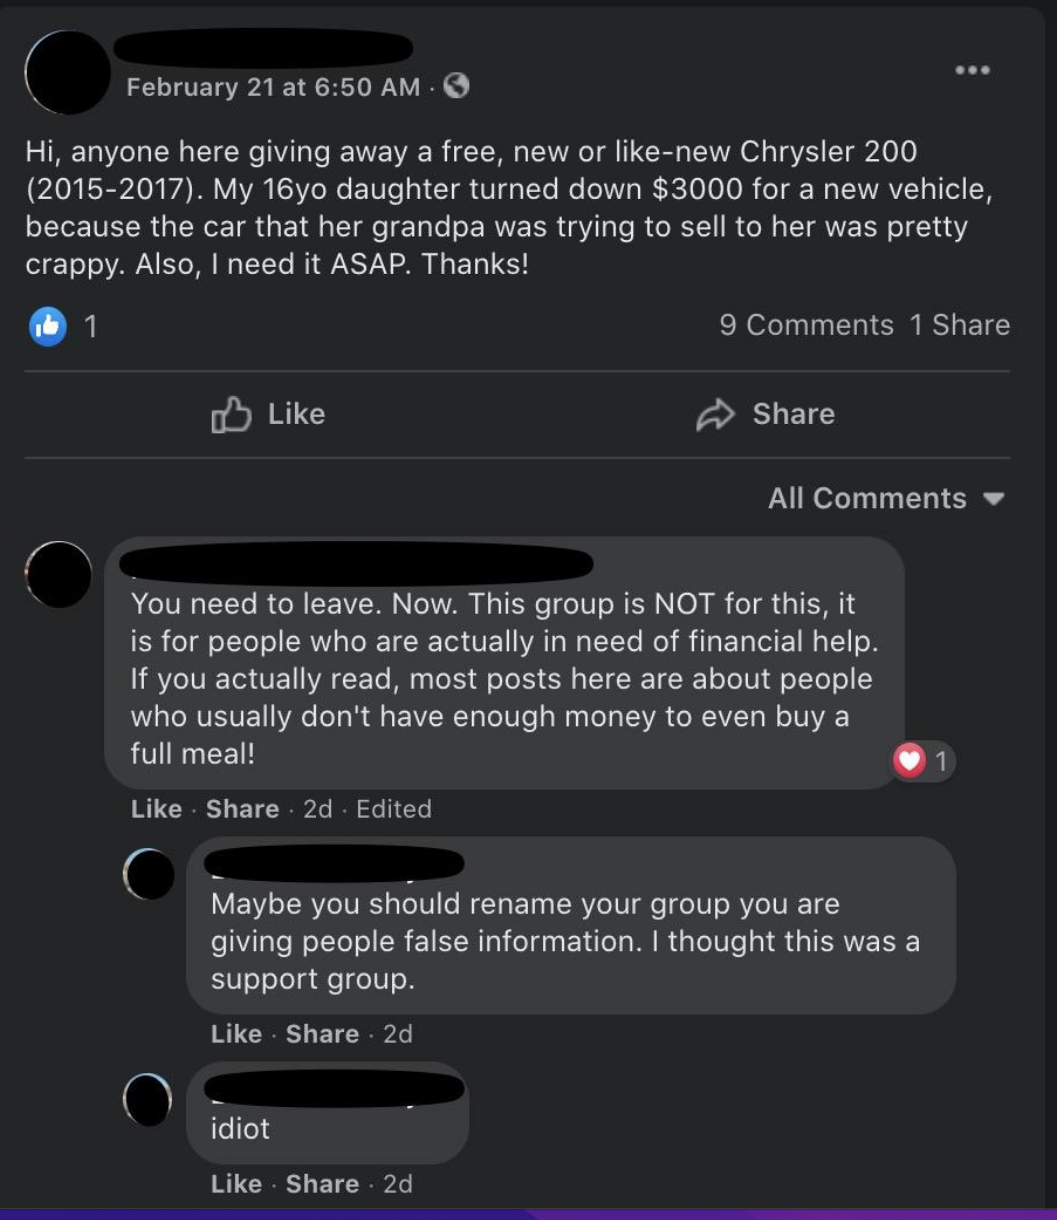 a person asking if anyone has a new Chrysler for sale because his daughter turned down a $3,000 car